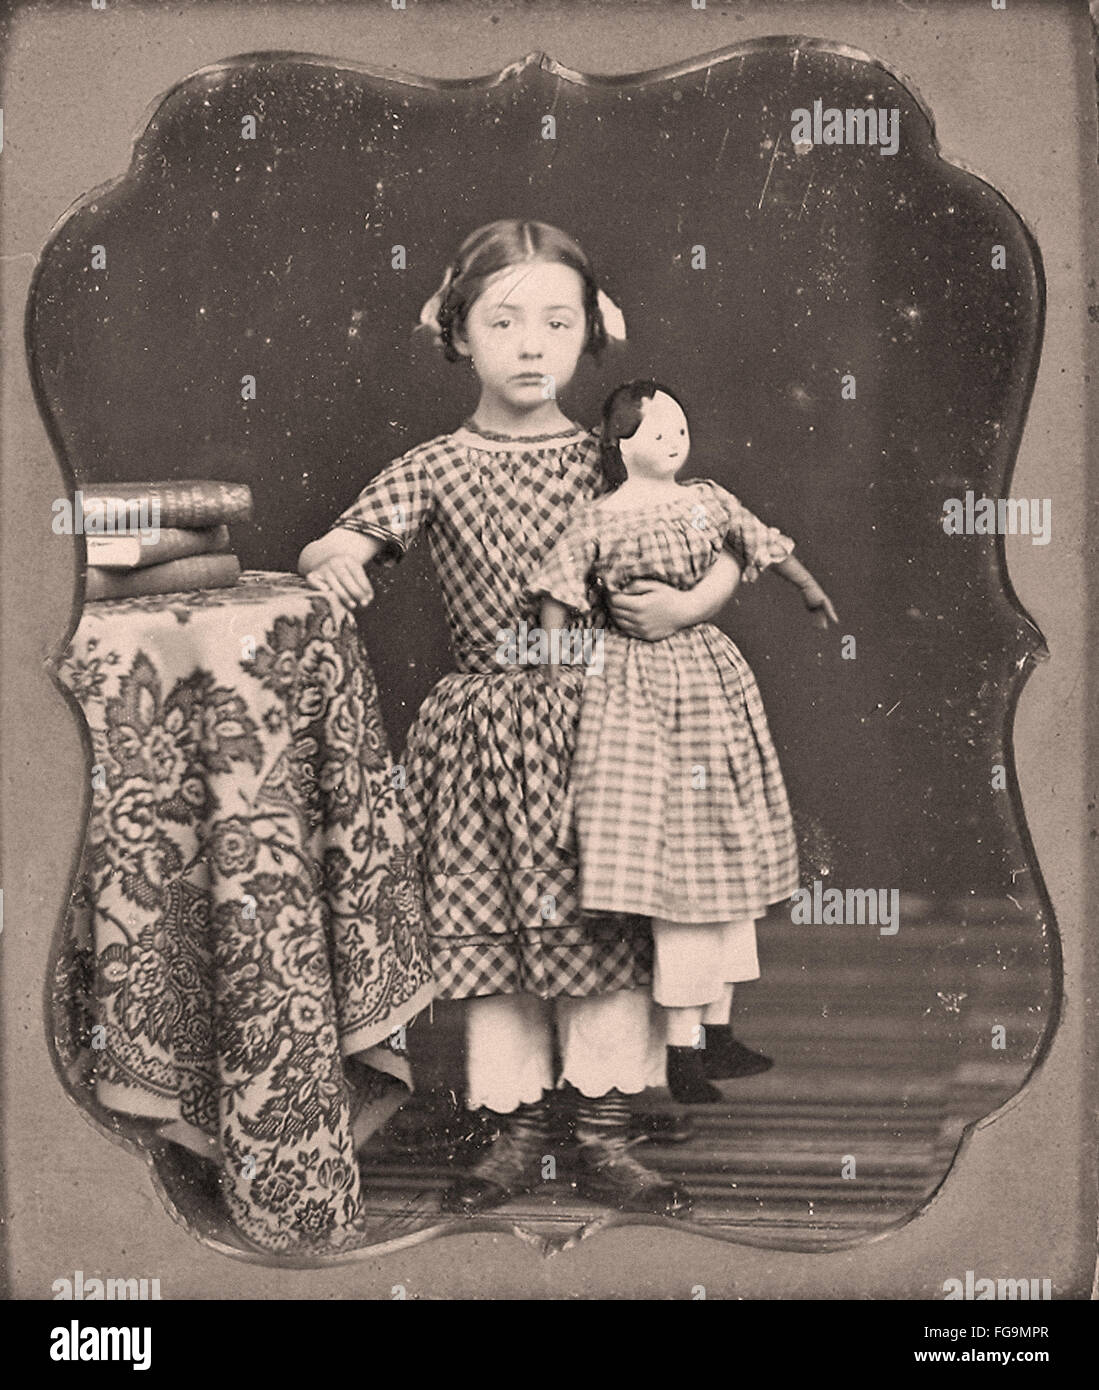 Young girl with her doll Stock Photo